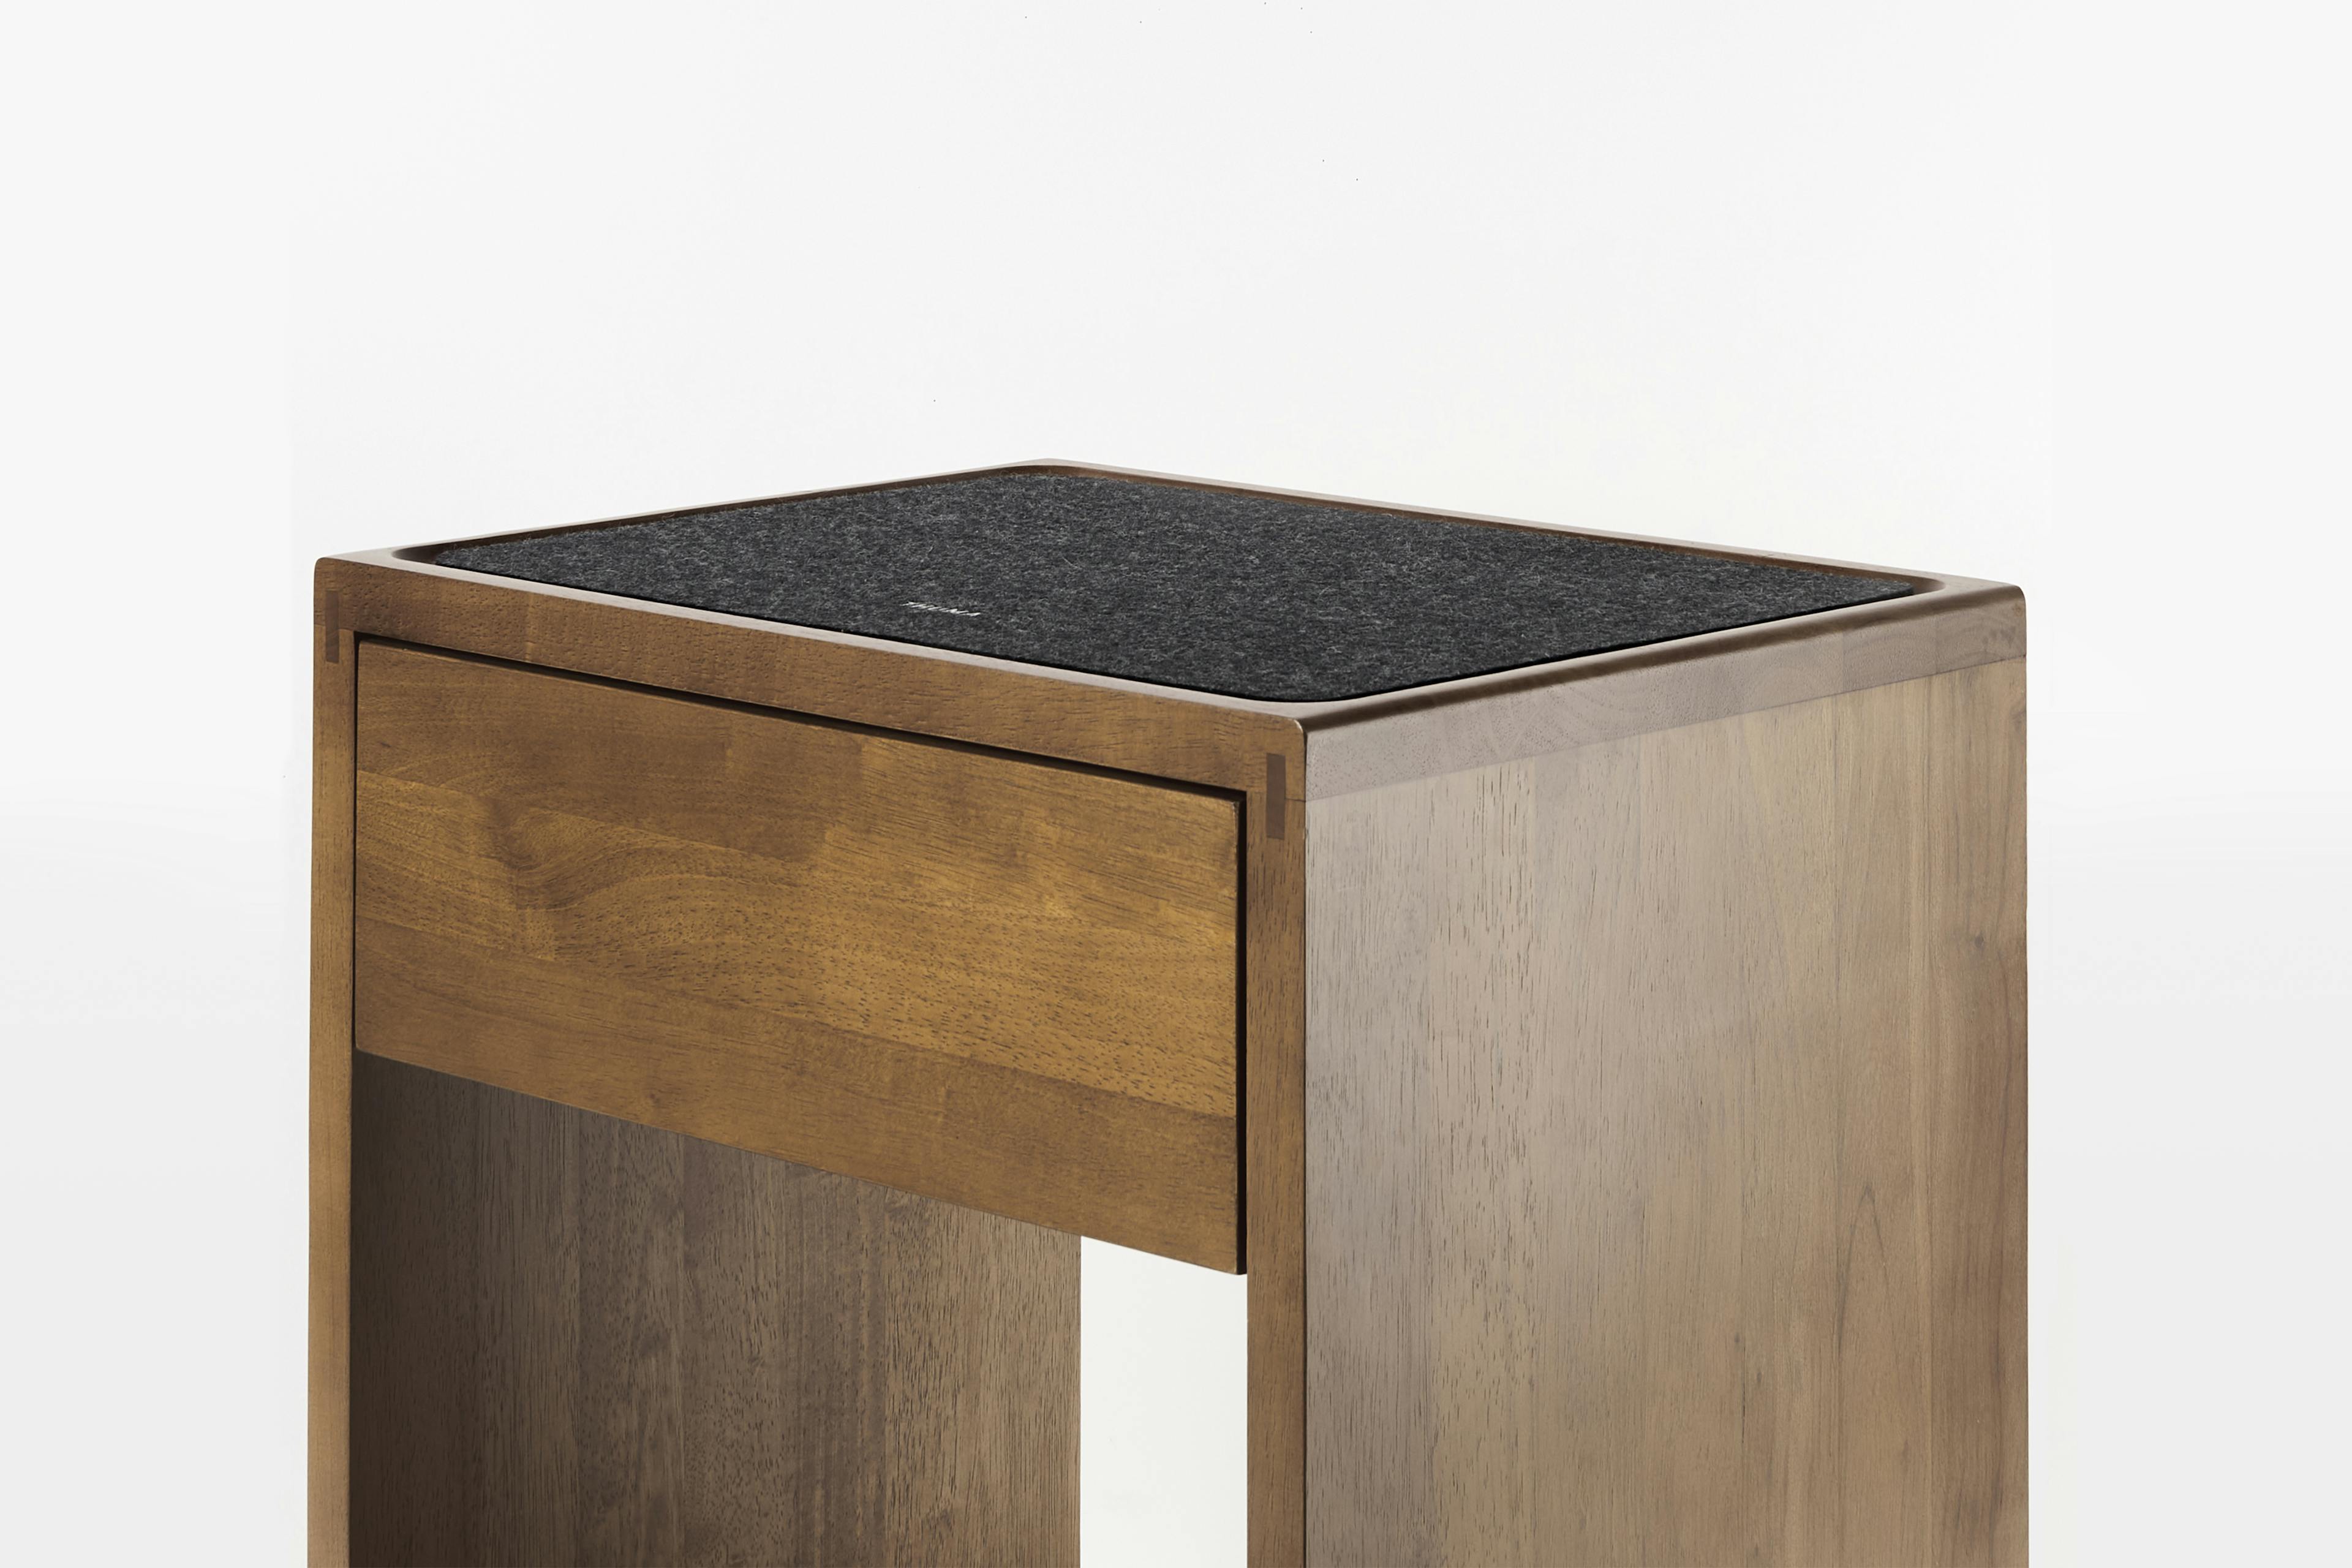 The Nightstand in Dusk Color with Heathered Grey Felt Top